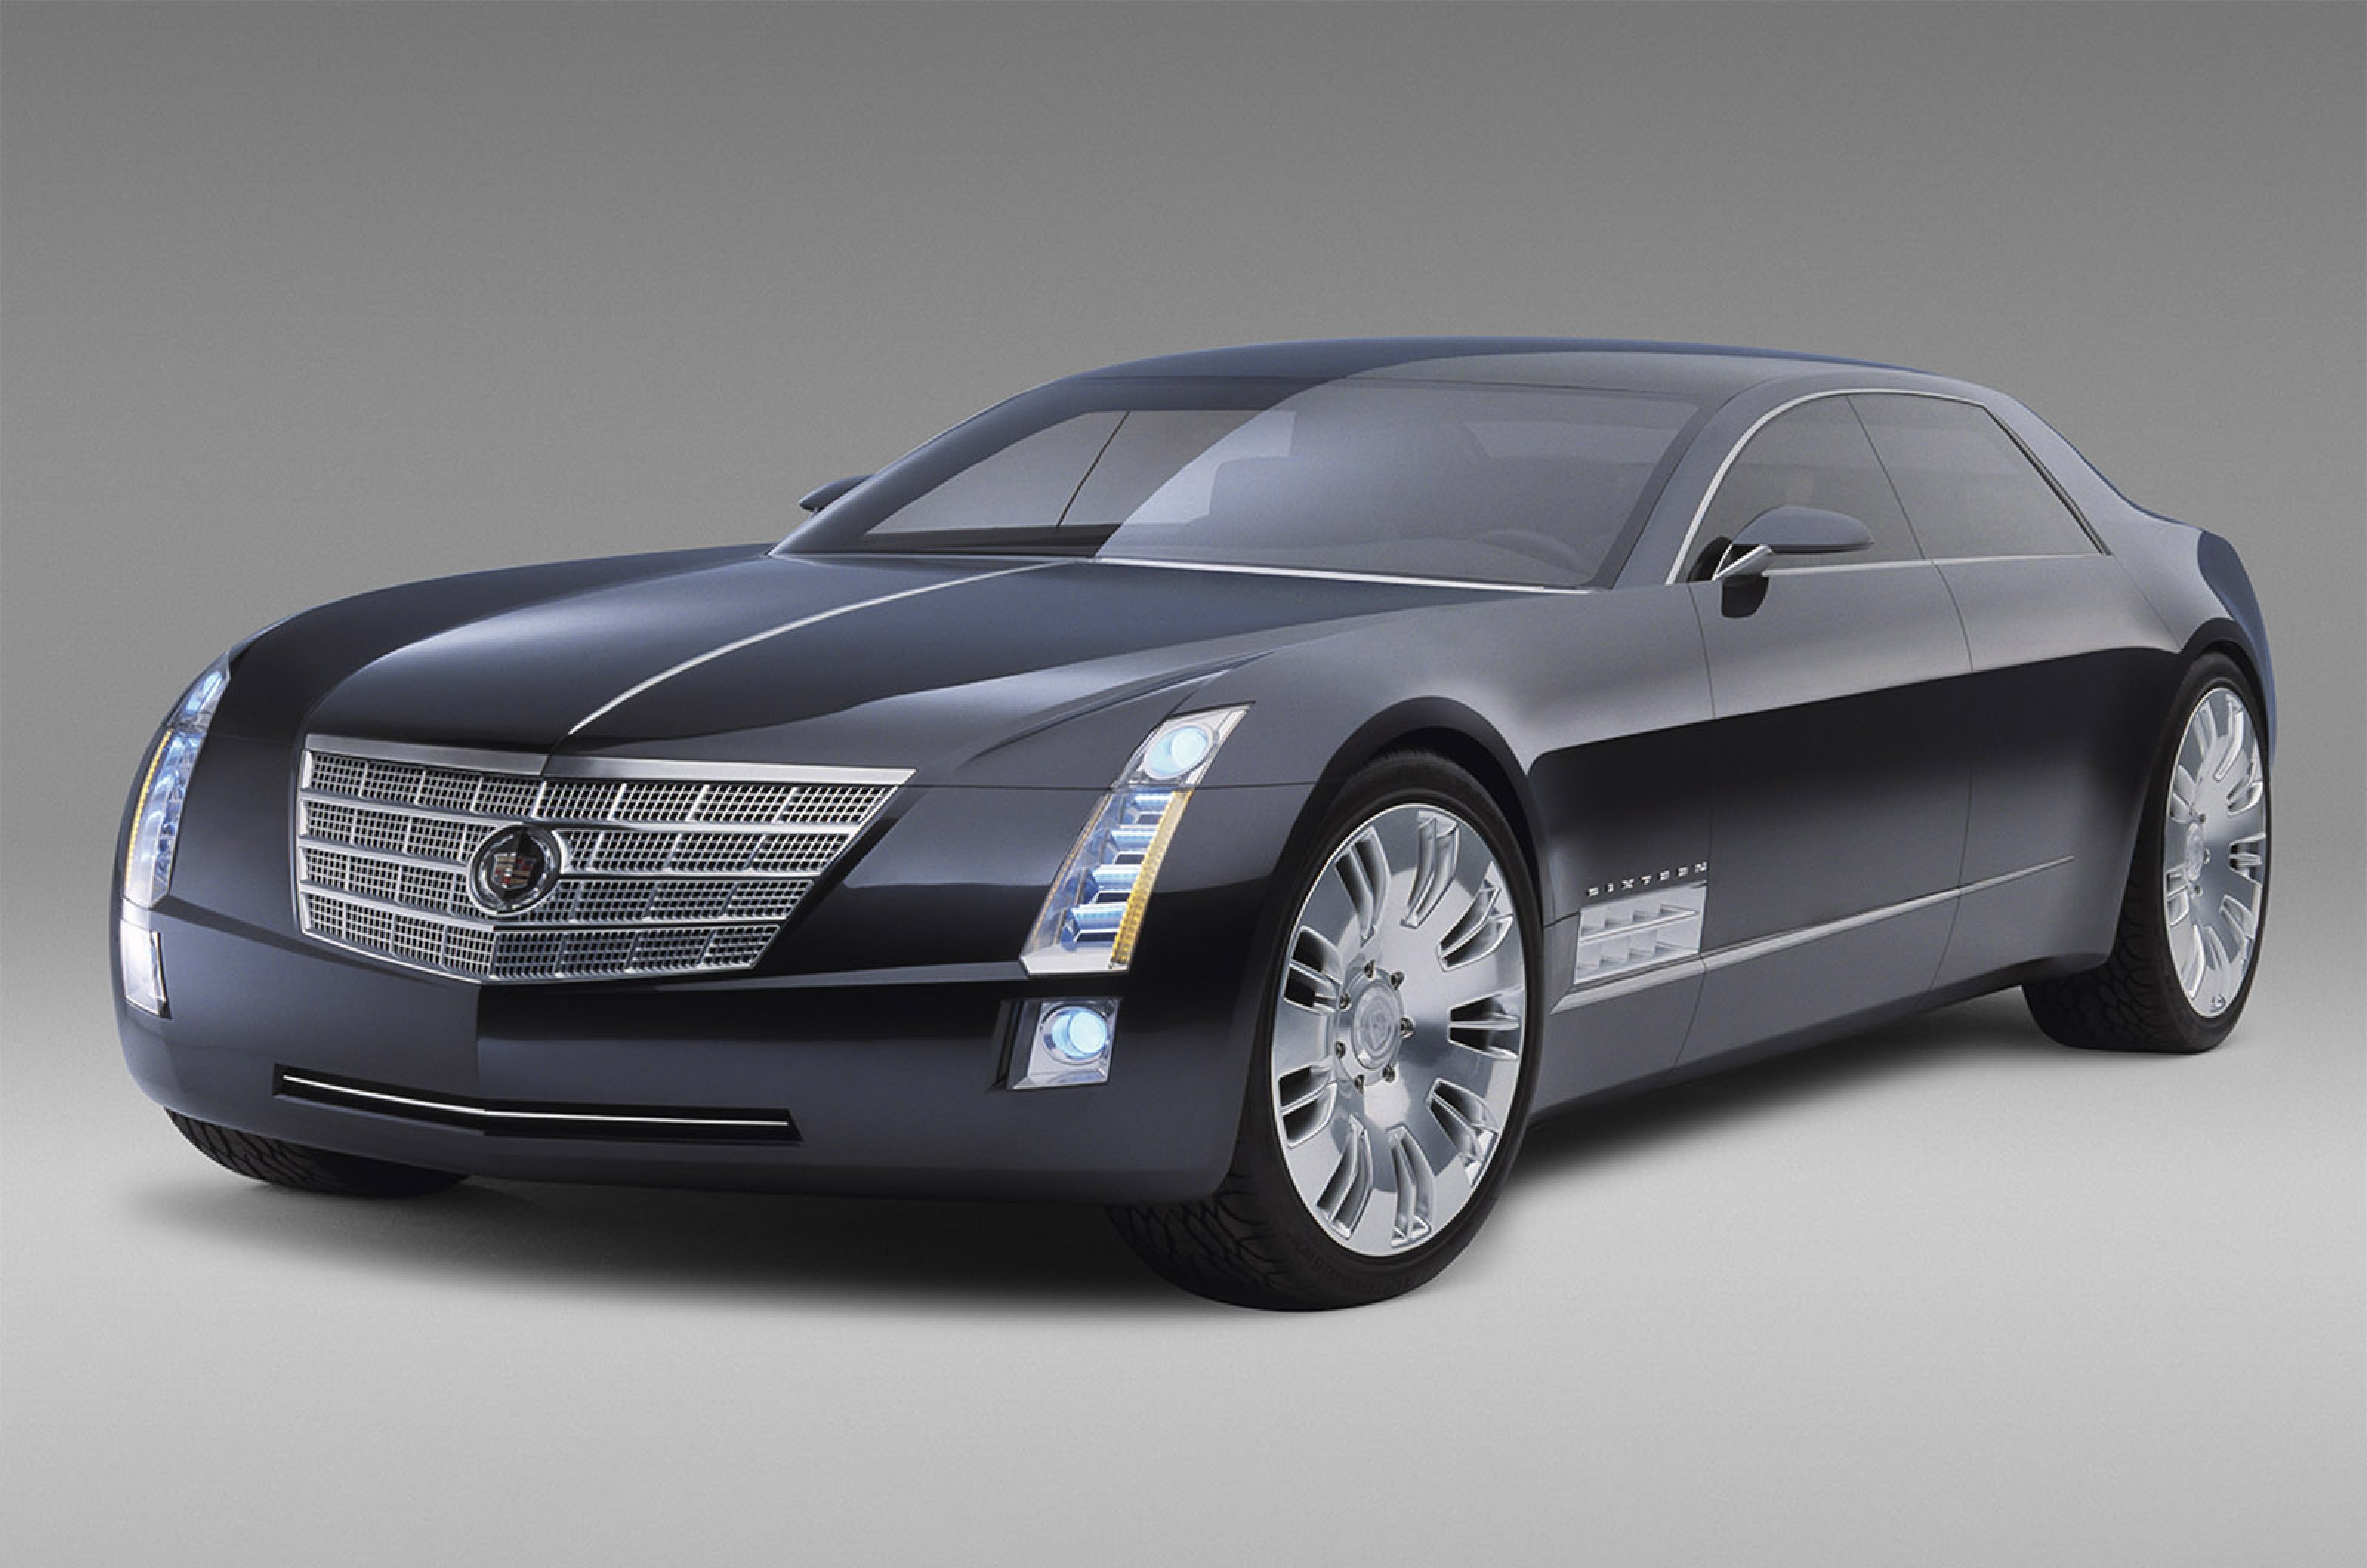 <p>Inspired by its pre-war V16 model, Cadillac’s Sixteen concept eschewed any notion of production viability, and effectively presented a 21st-century version of GM’s ‘dream cars’ of yore.</p>  <p>Riding on 24in polished aluminium wheels, the 5.7m-long Sixteen was powered by a bespoke 13.6-litre V16 engine producing 986bhp (1000hp) and 1000lb ft of torque.</p>  <p>‘Displacement on Demand’ tech meant that either eight or 12 of the engine’s cylinders could be shut down when output wasn’t needed, meaning it could achieve a relatively frugal 16.65mpg under normal running.</p>